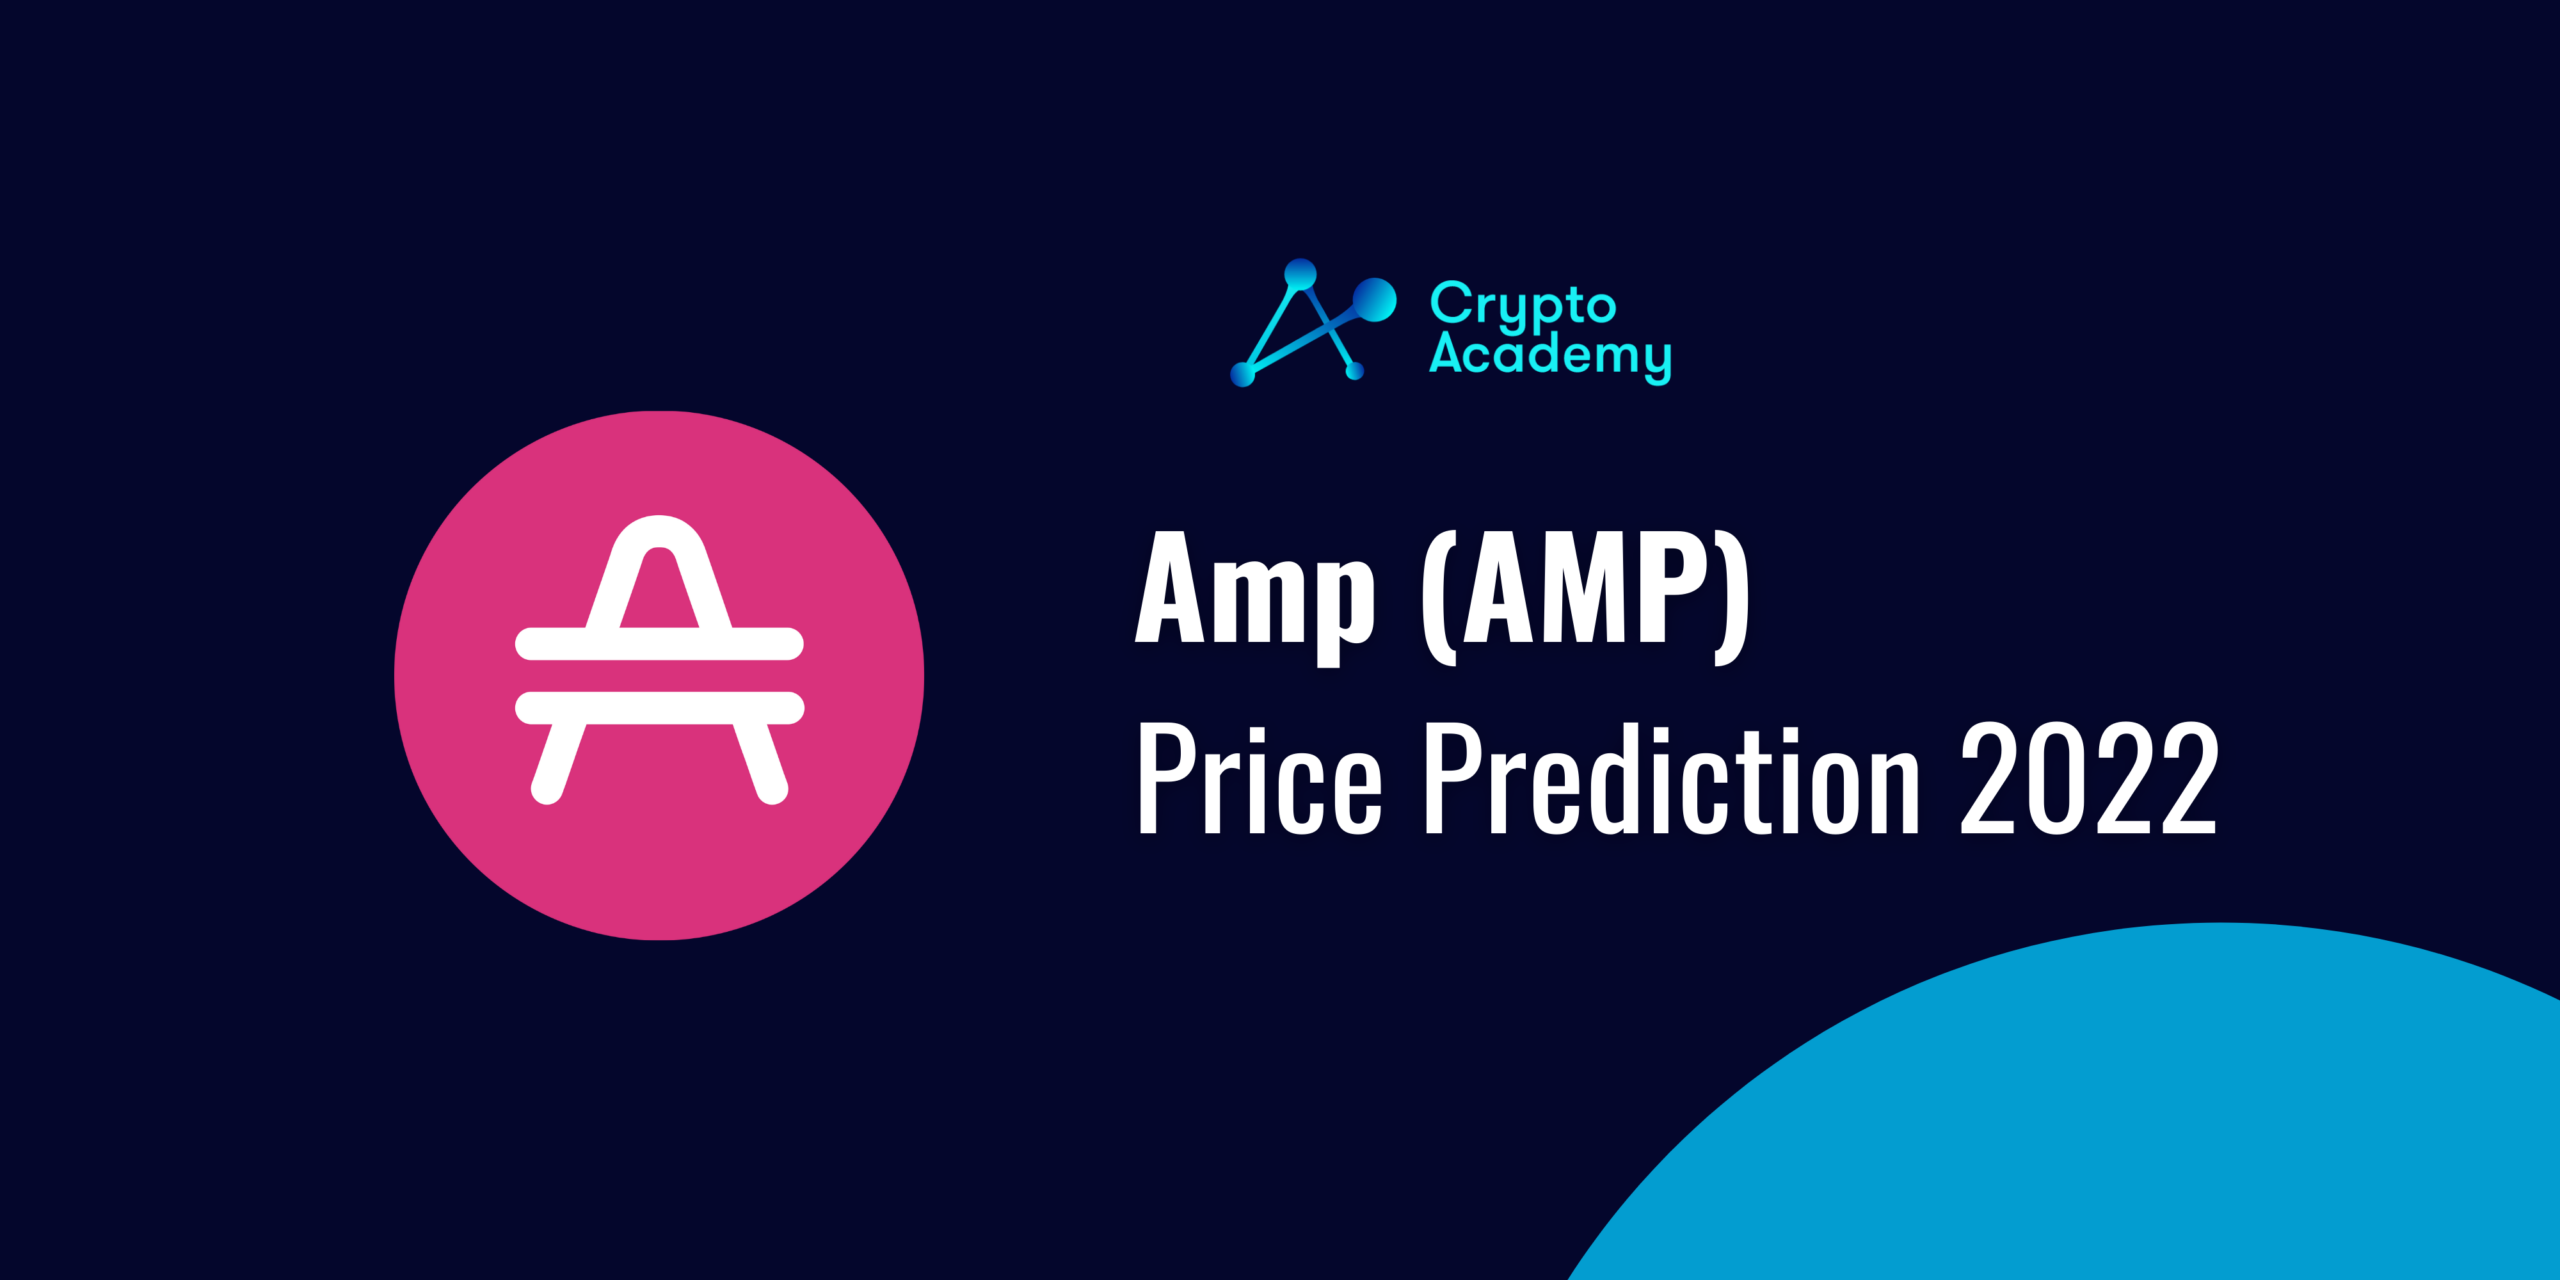 Amp Price Prediction 2022 and Beyond - Will AMP Ever Reach $1?